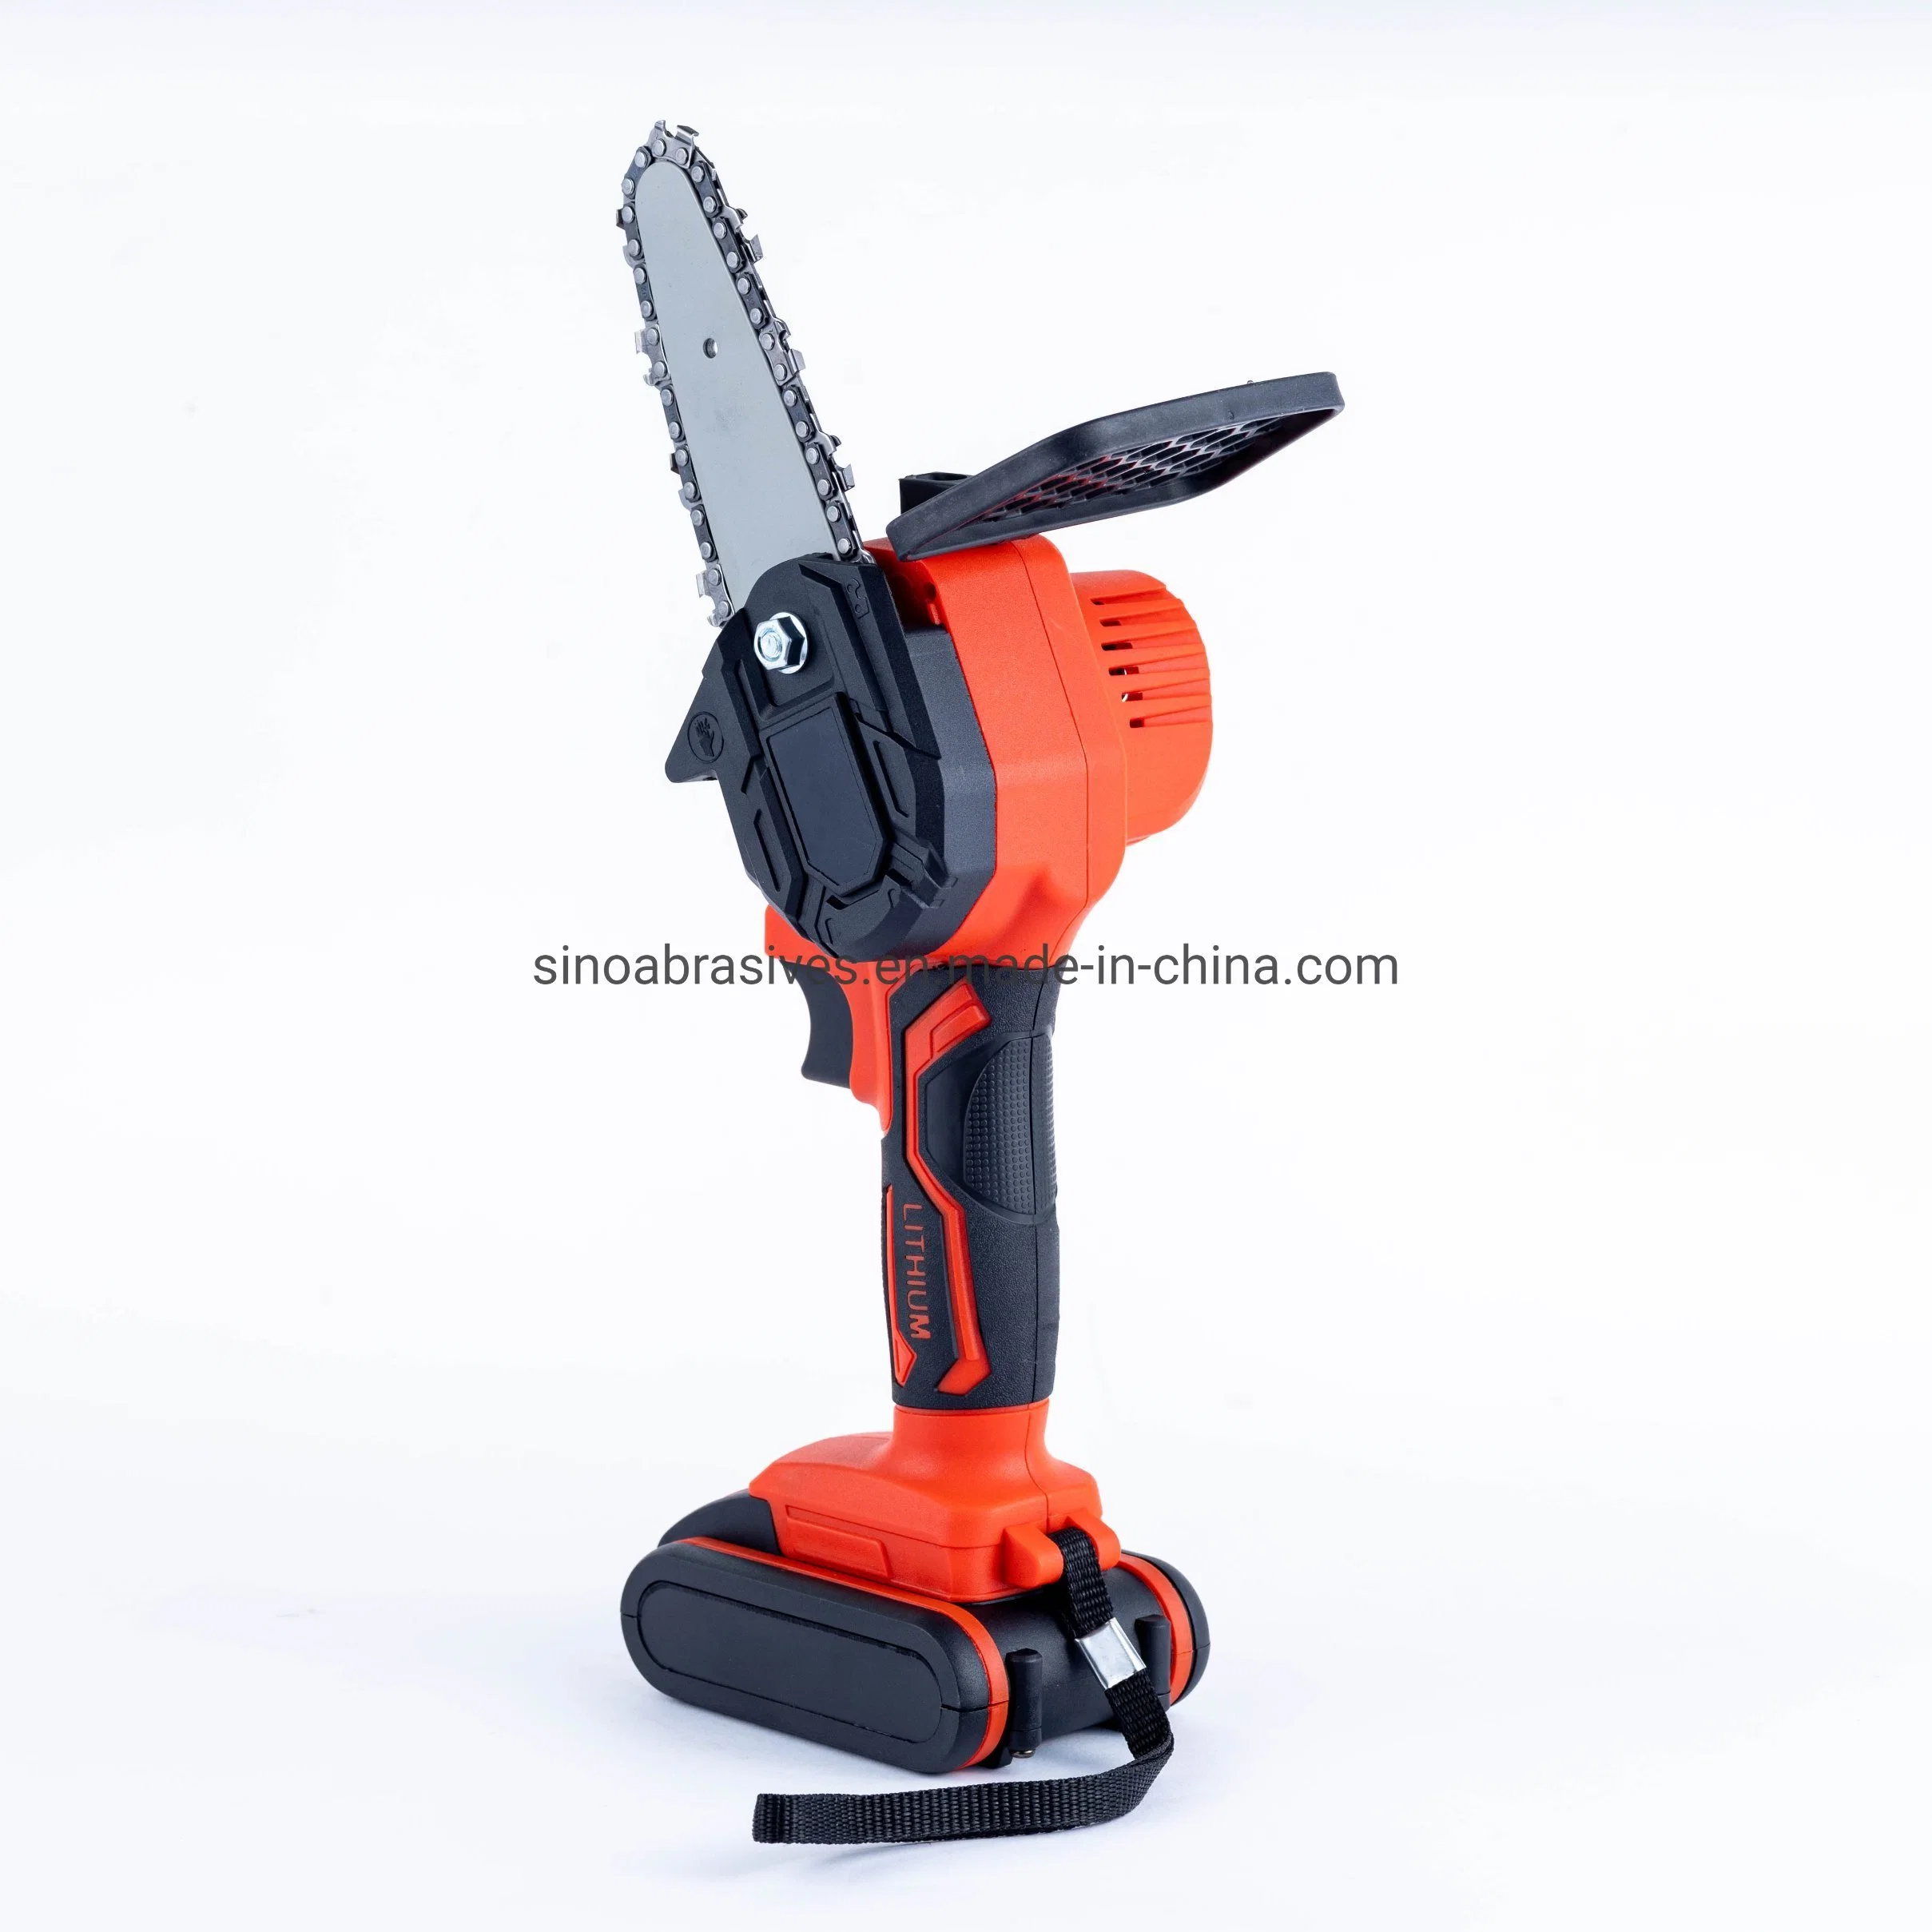 4 Inch Portable Chainsaw Power Tool for Courtyard Tree Branch Wood Cutting